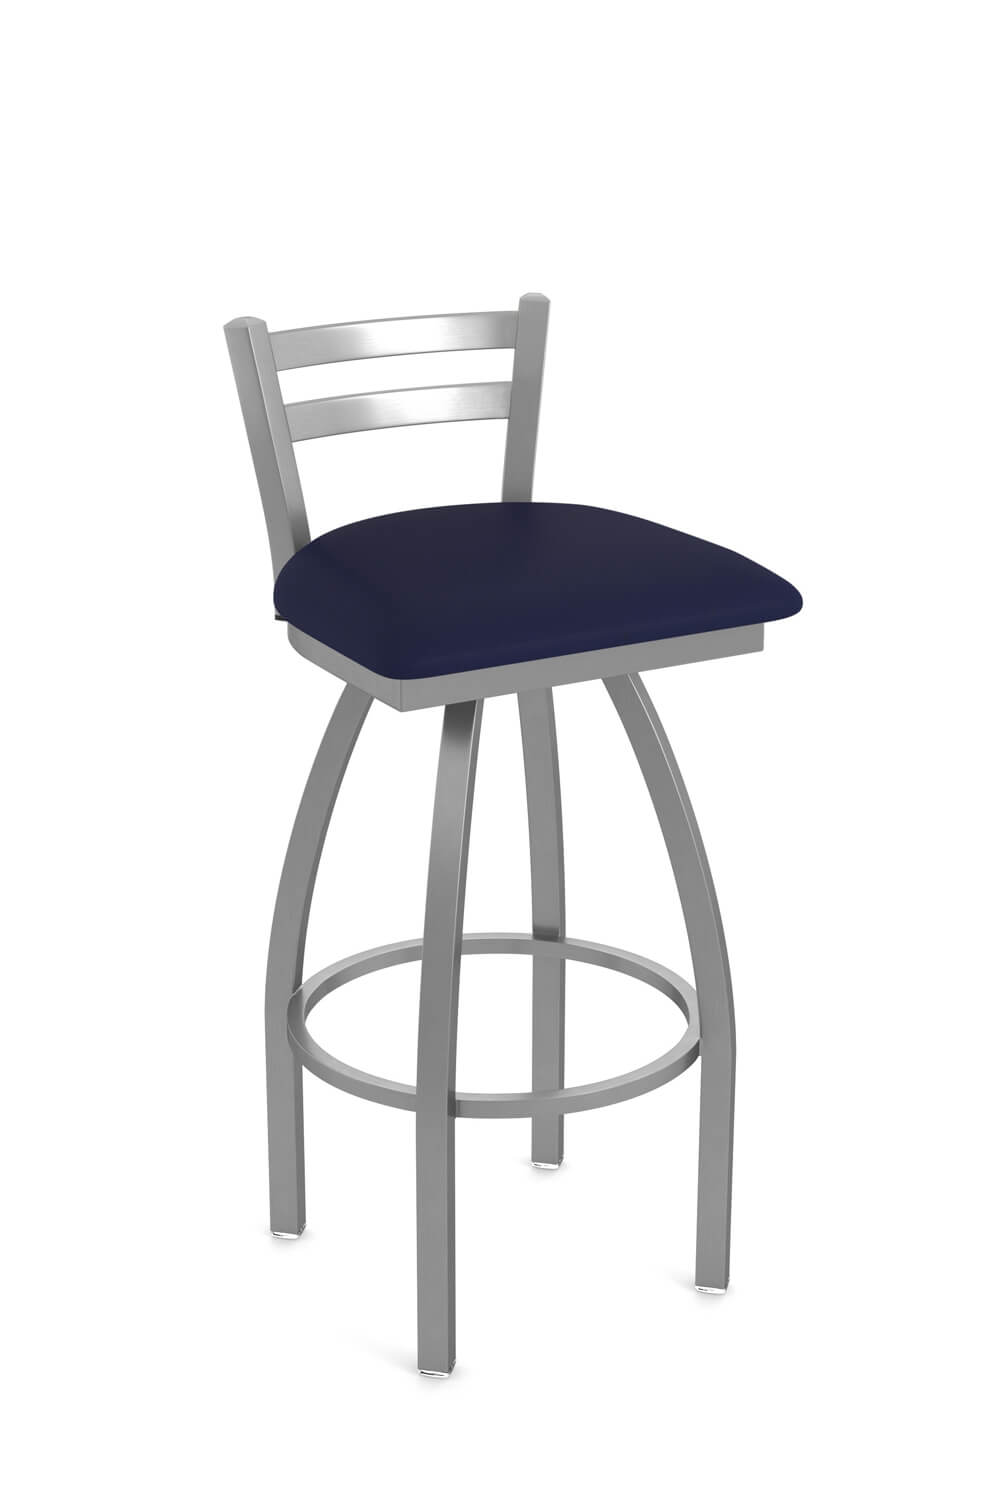 Holland's Jackie Outdoor Stainless Steel Bar Stool with Low Back - in Breeze Sapphire Vinyl